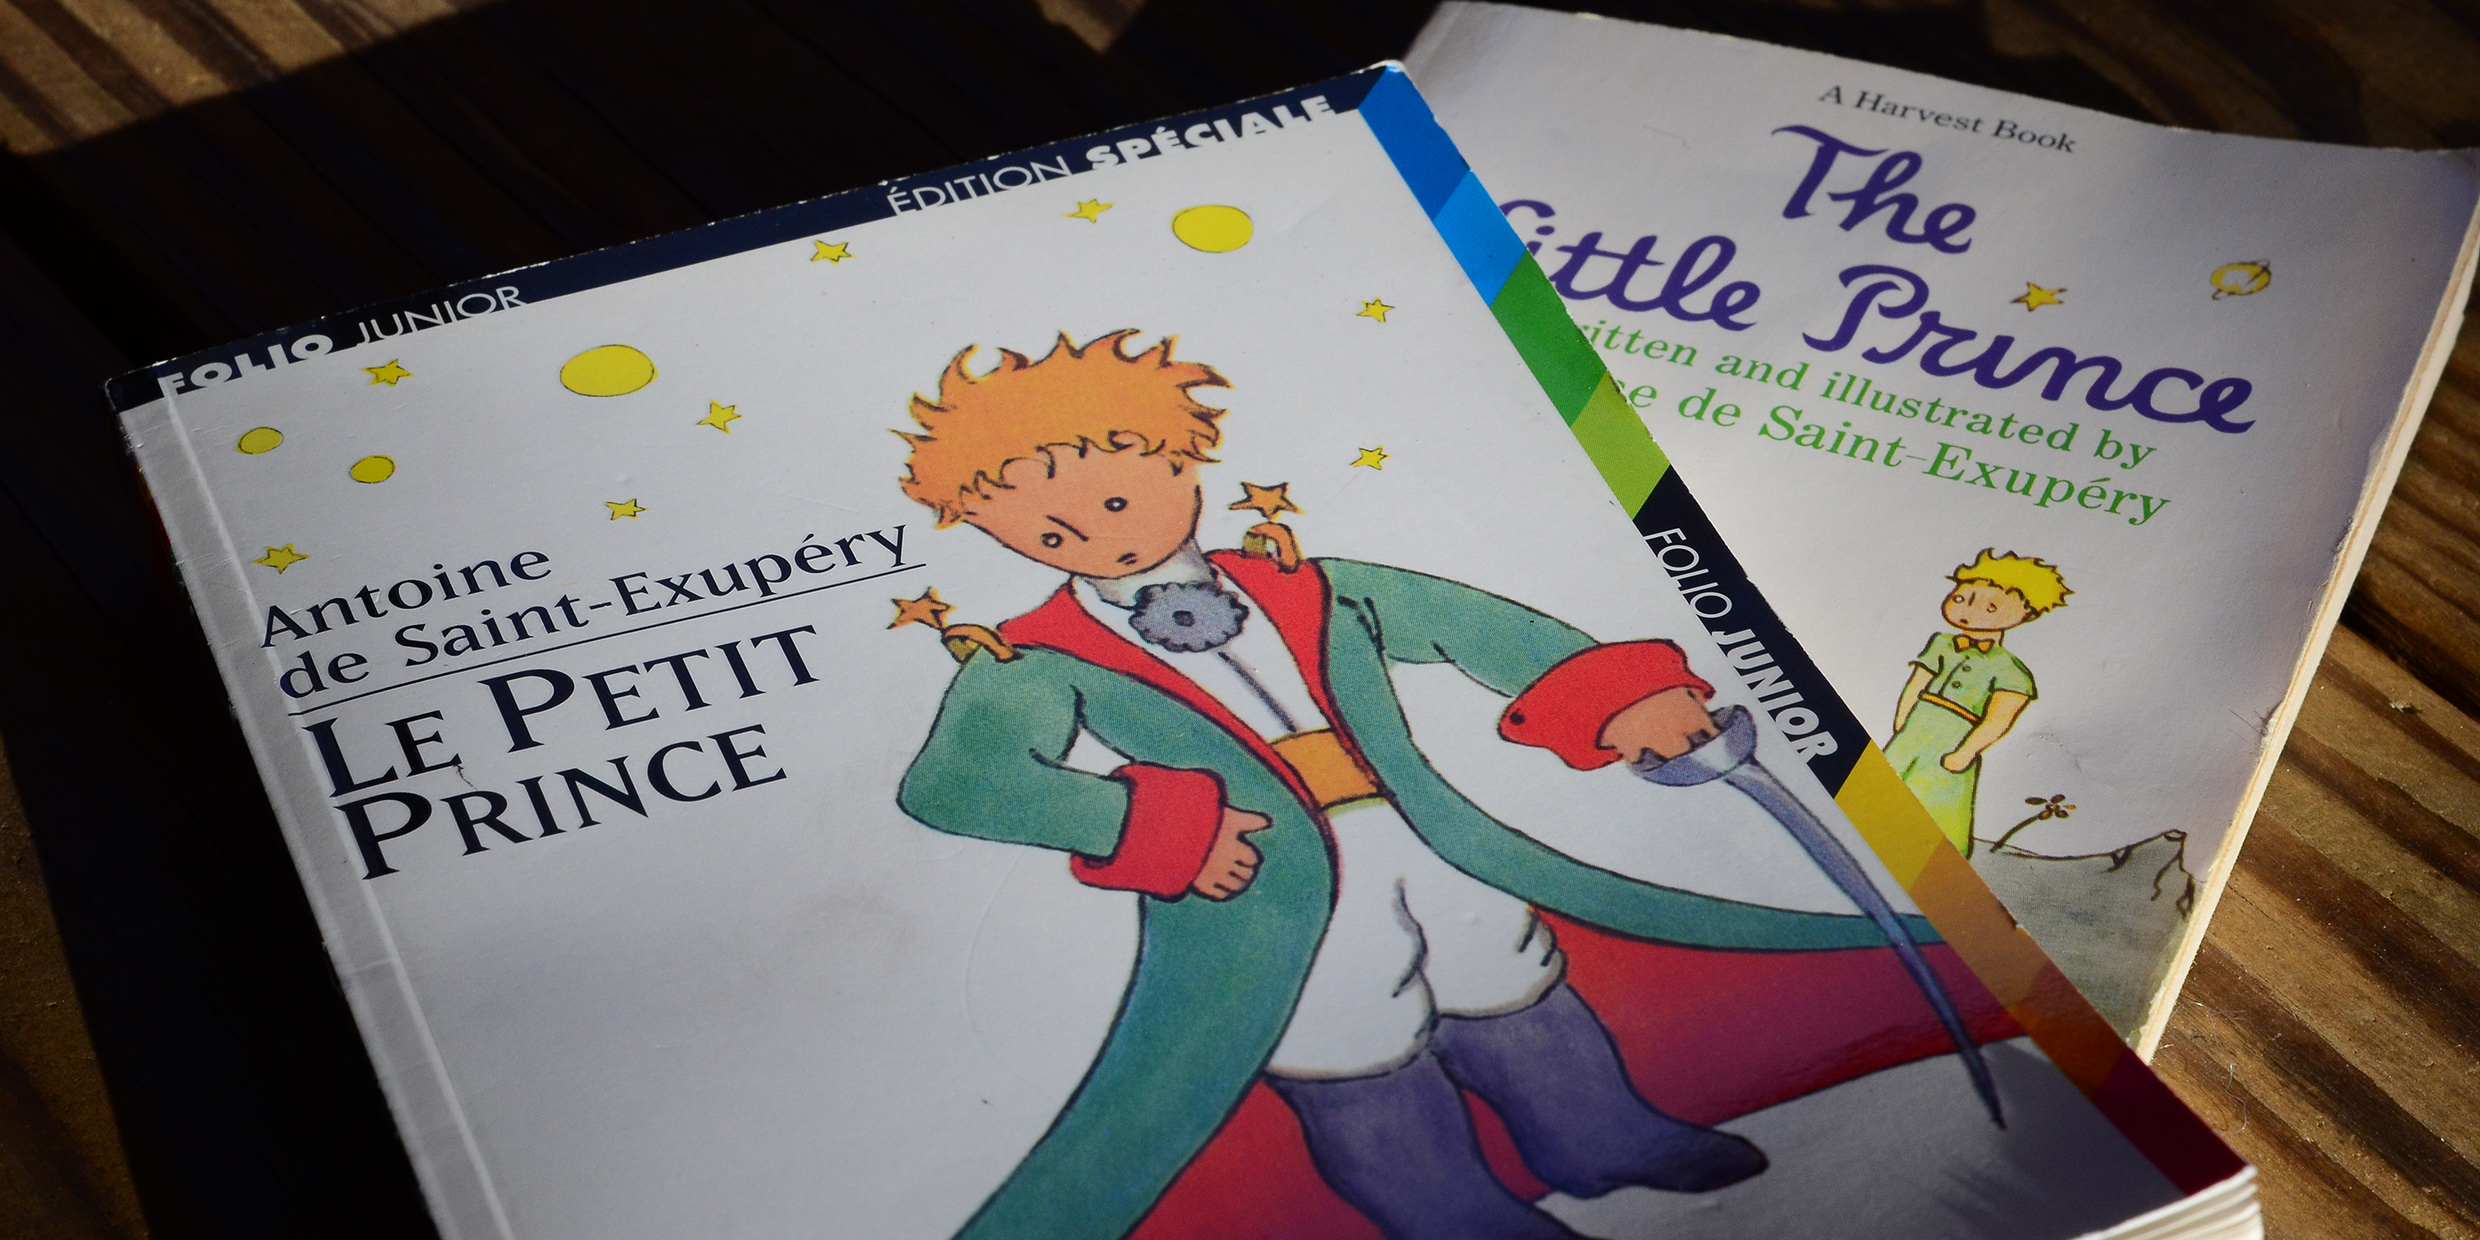 Image of the book "The Little Prince"